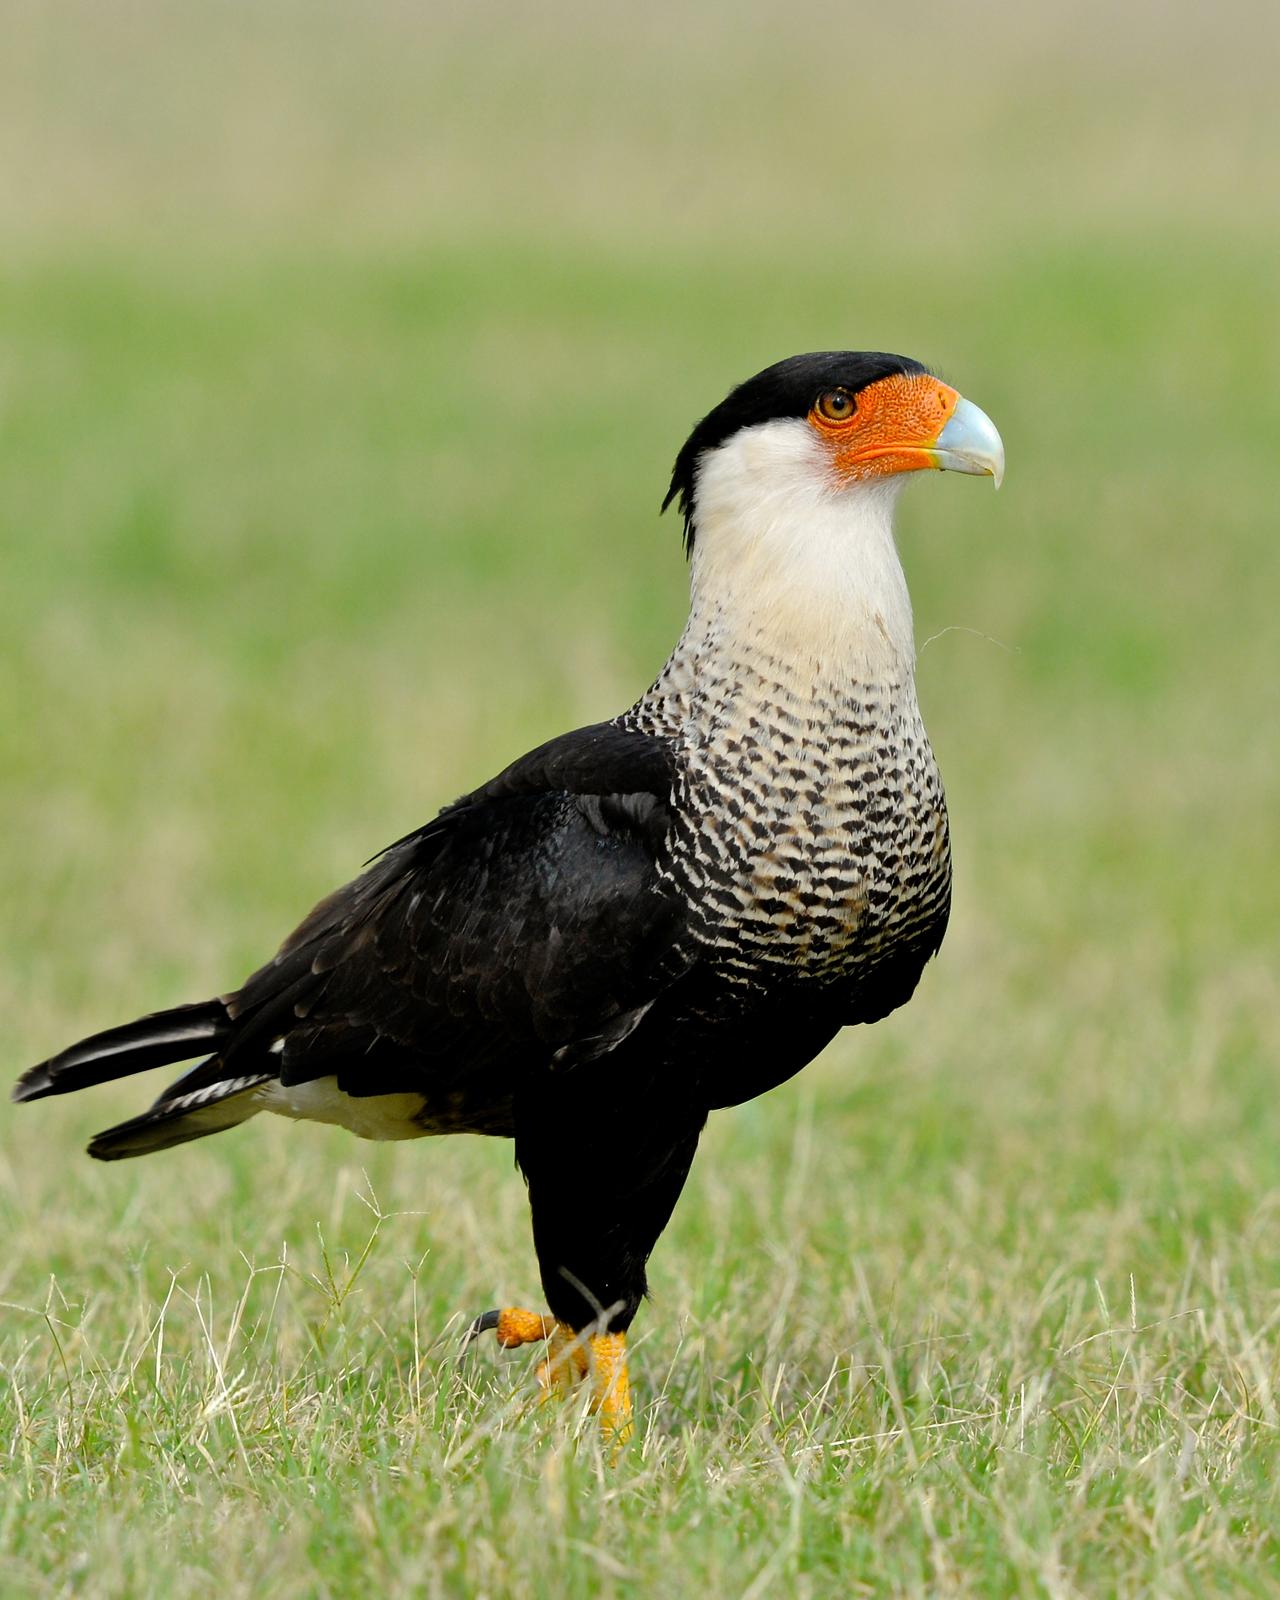 Crested Caracara Photo by Gerald Friesen